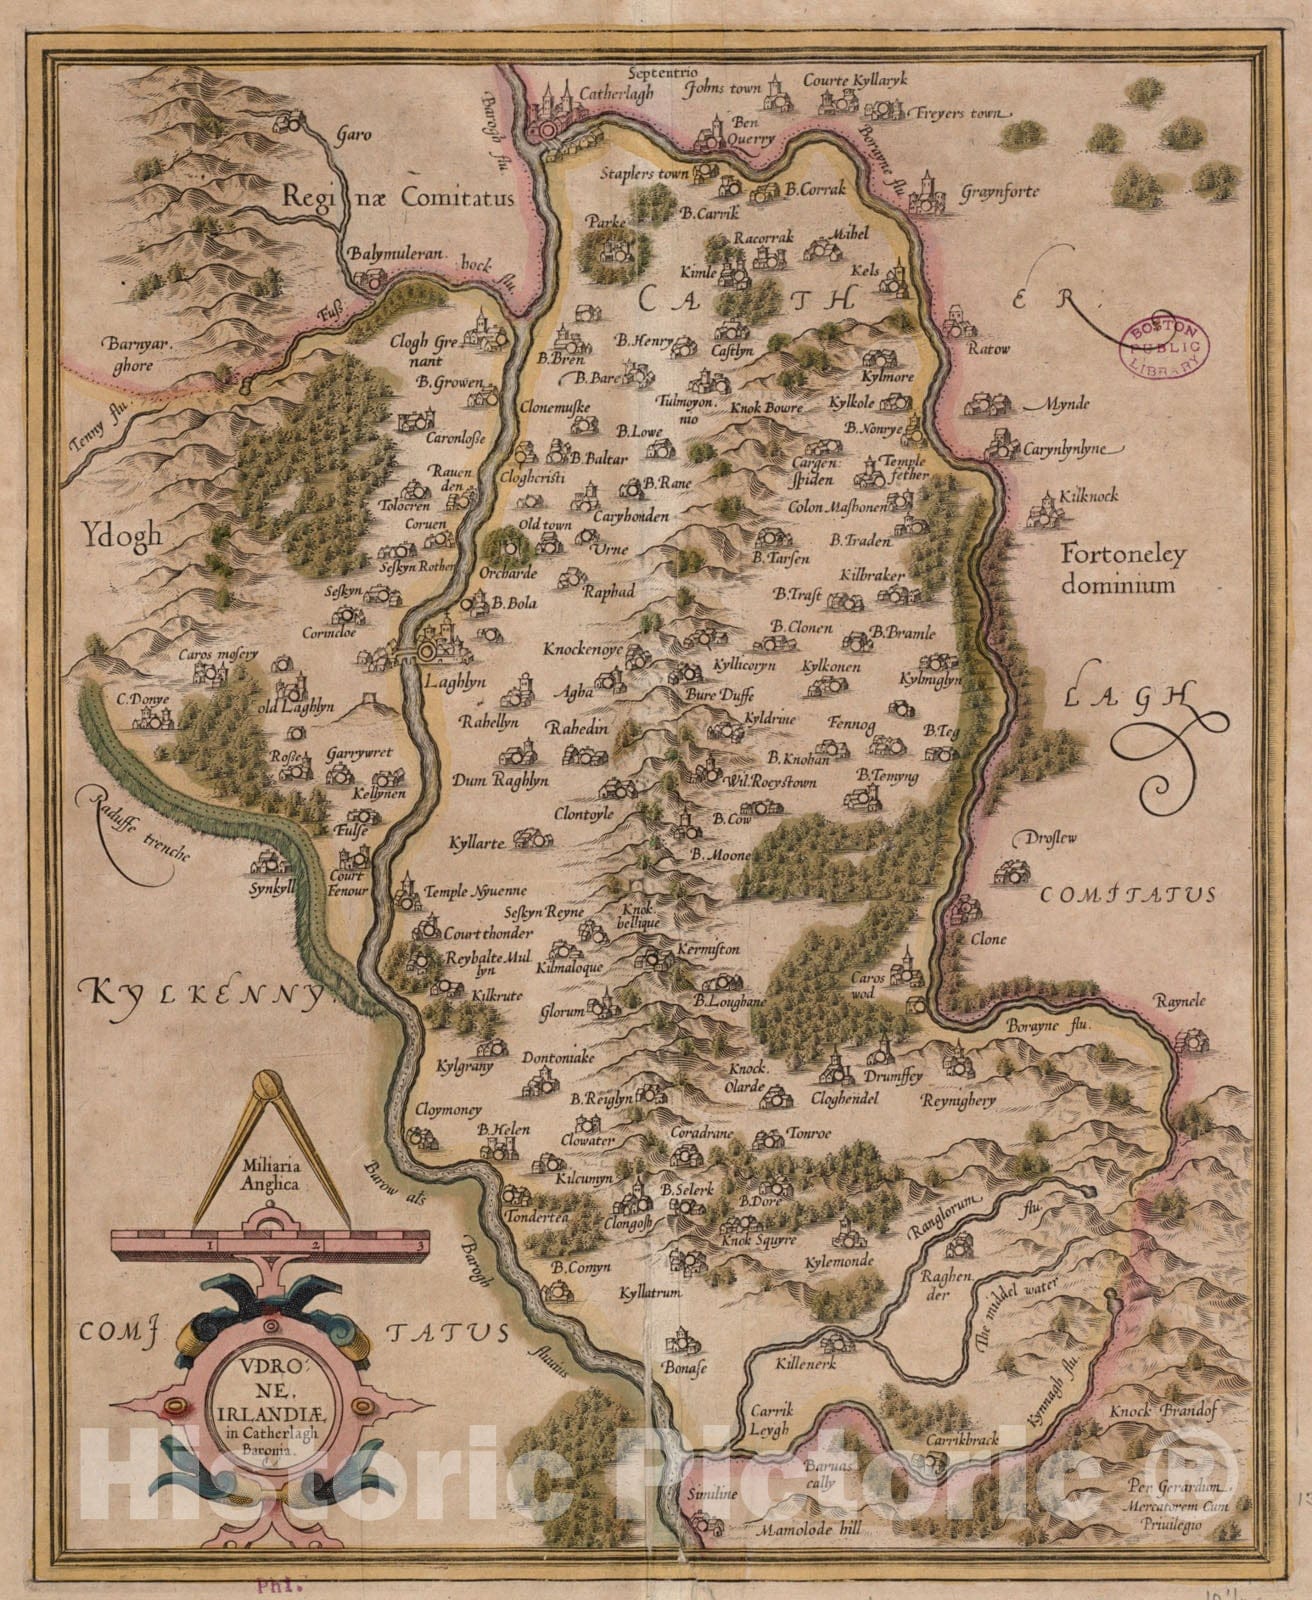 Historical Map, 1628-1633 Vdrone Irlandia in Catherlagh Baronia, Vintage Wall Art